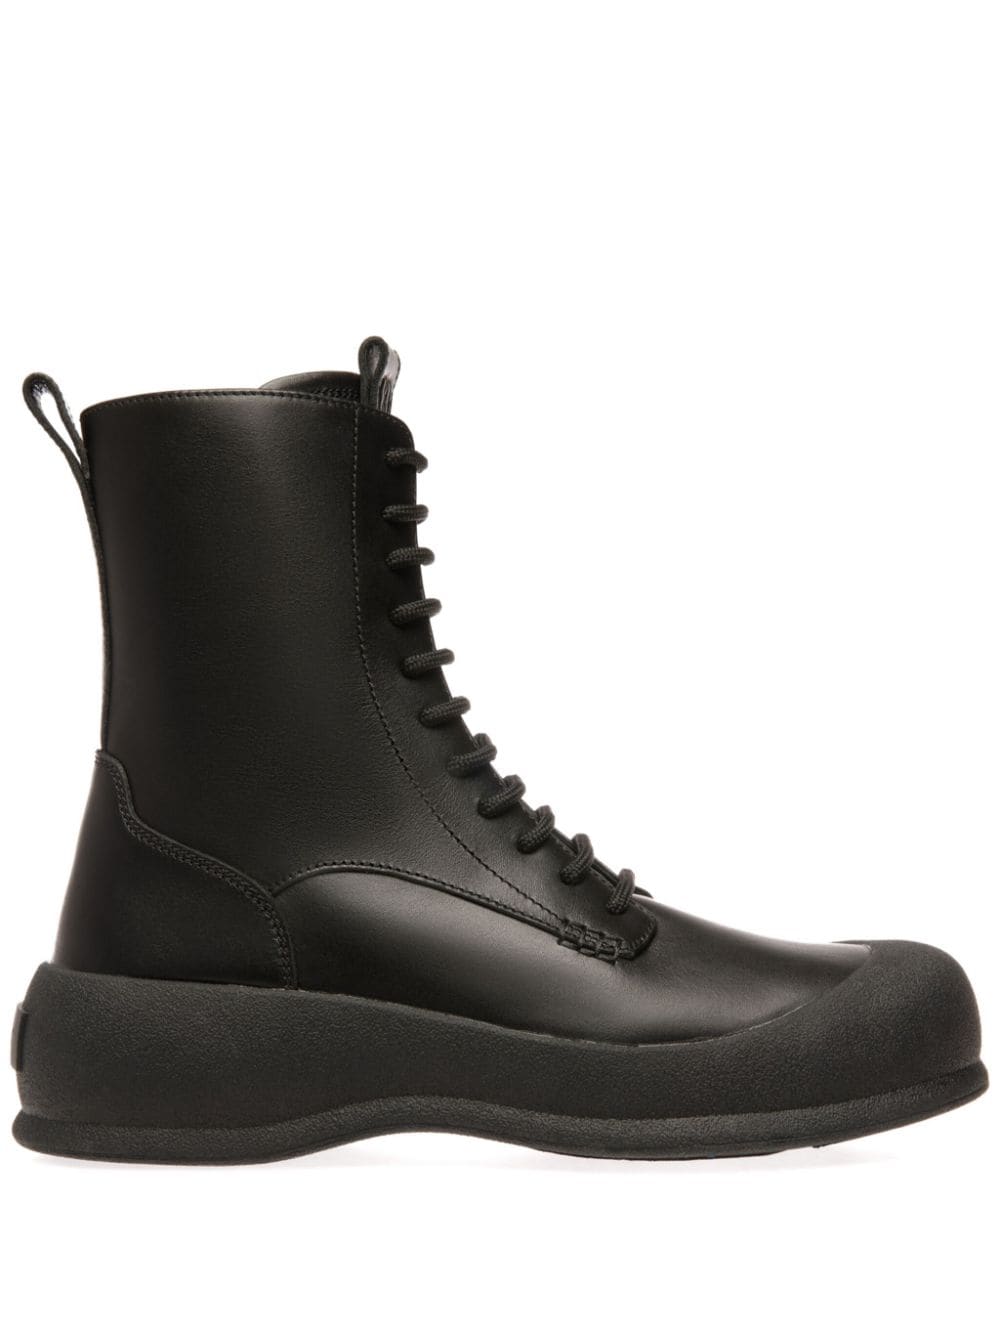 Bally Celsyo leather boots - Black von Bally